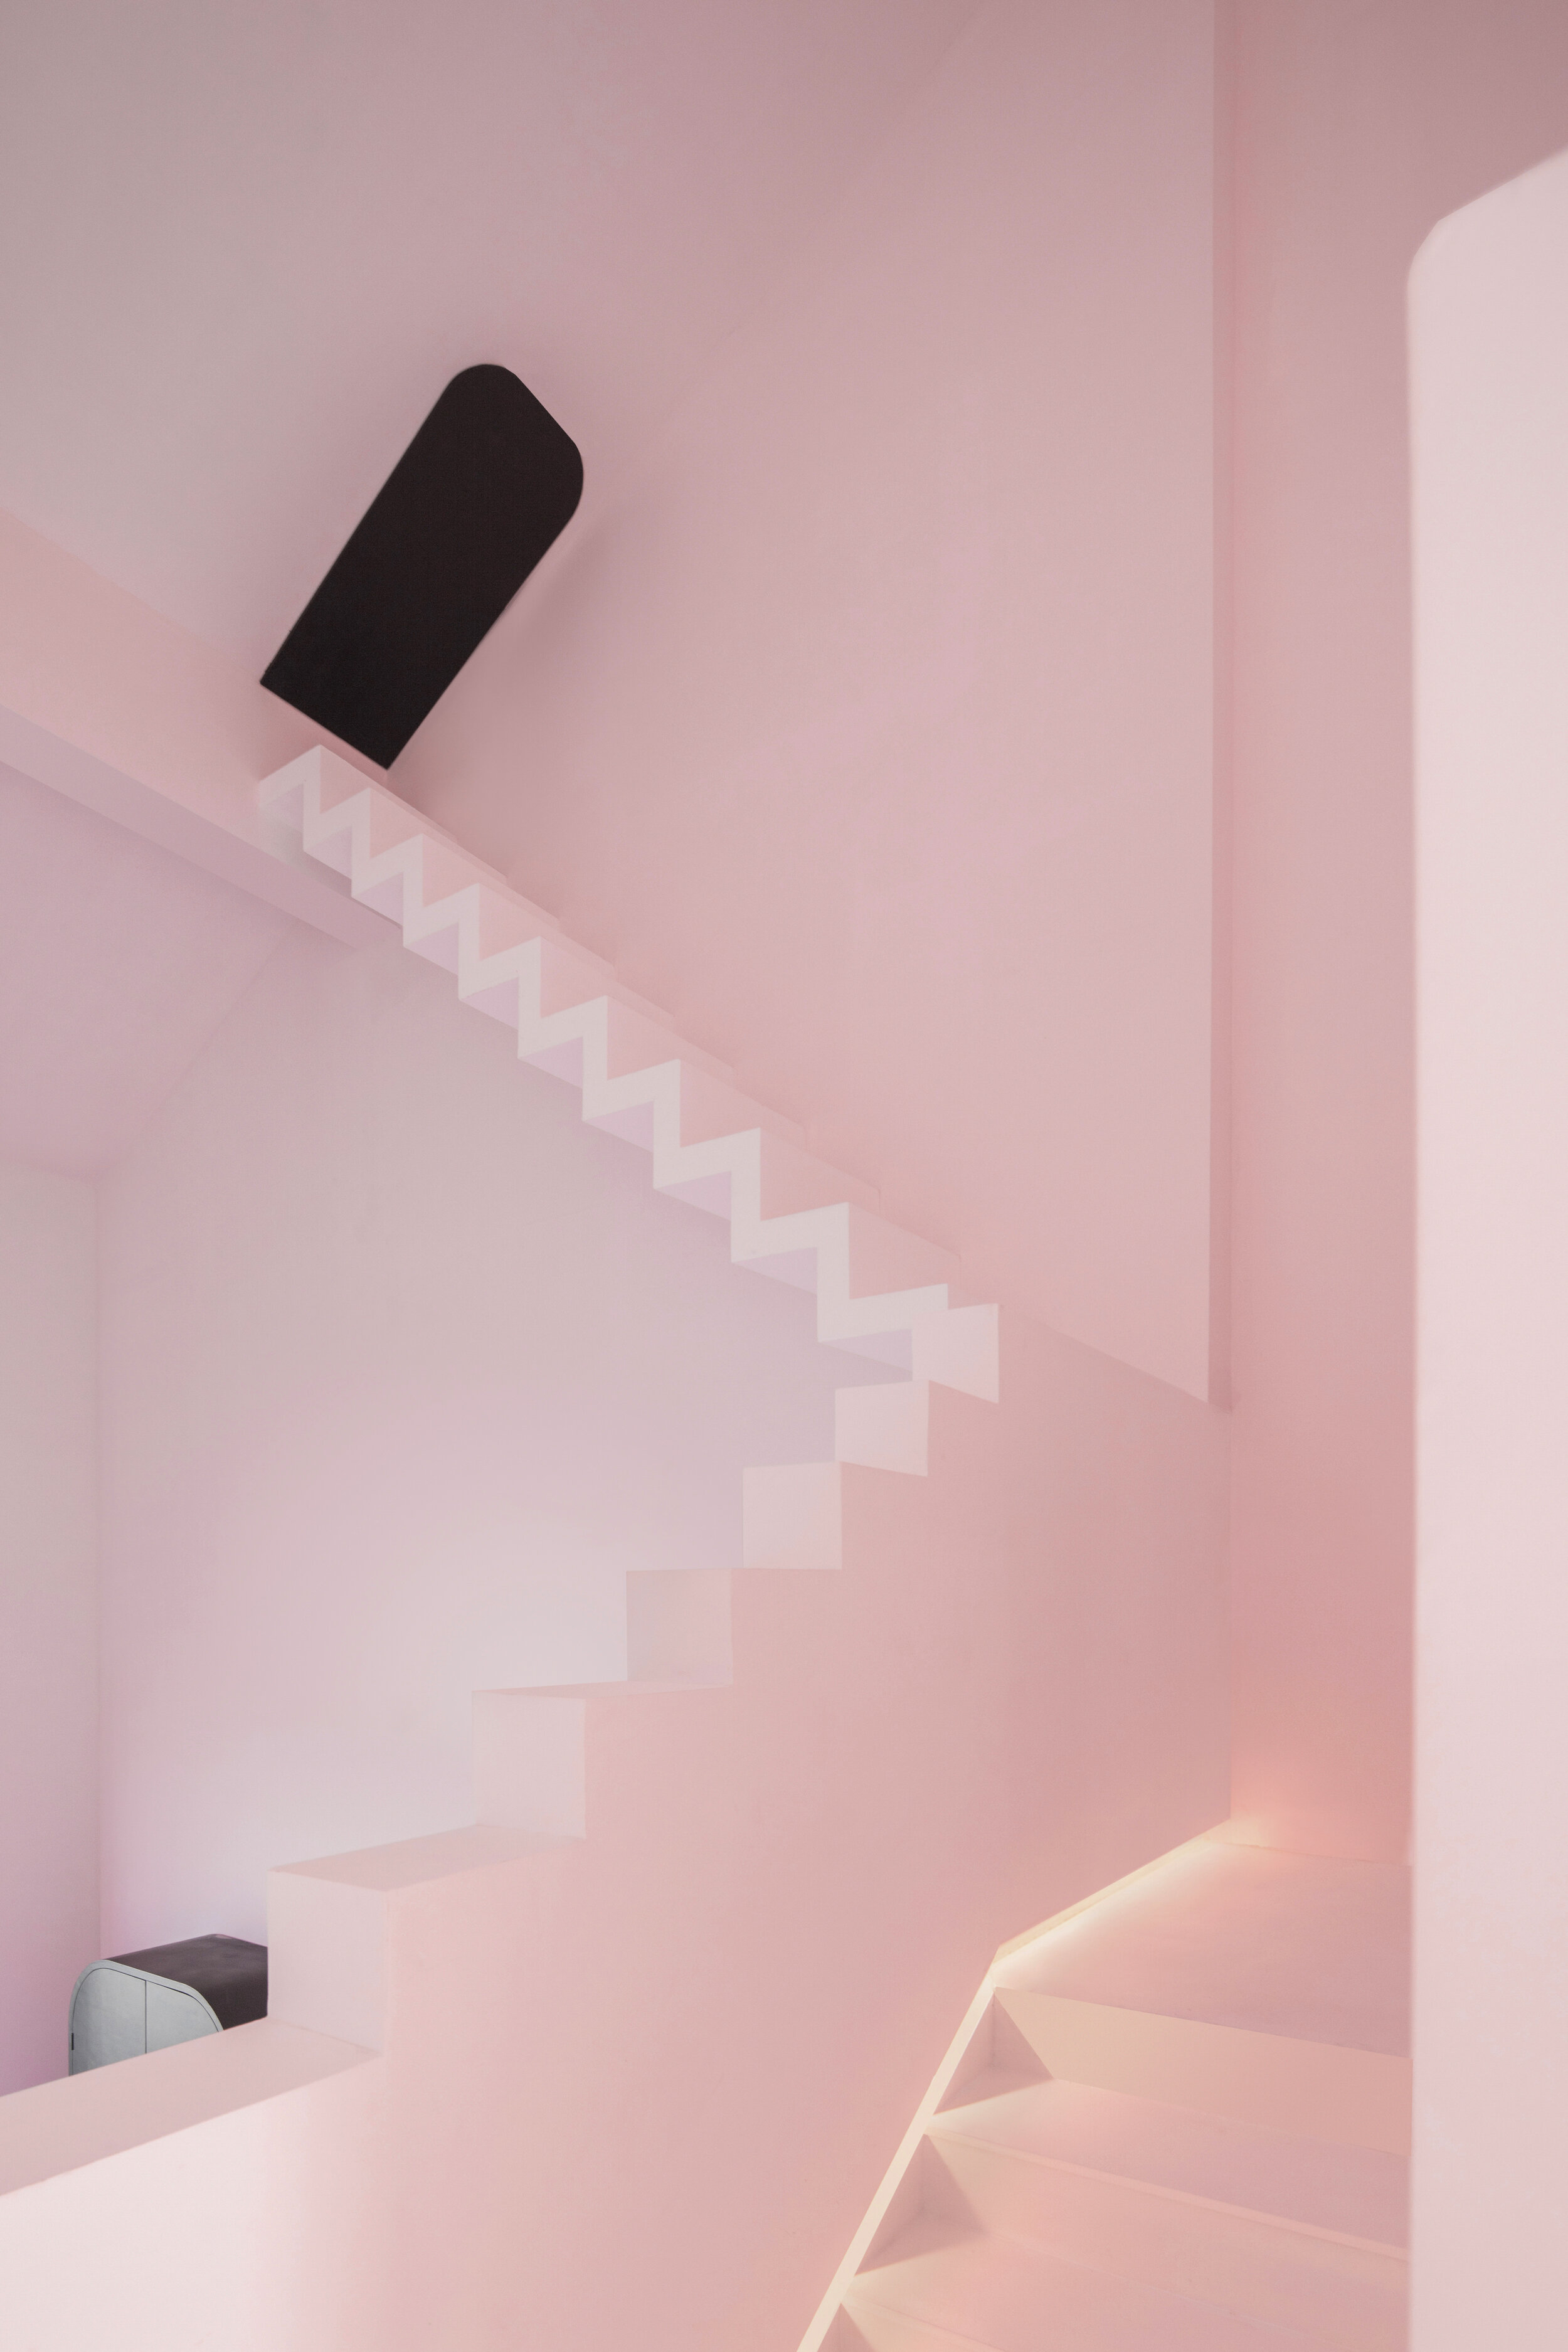 Dream - Anti-gravitational stairs leading to doors in the ceiling @张超 L 20181113-9.jpg